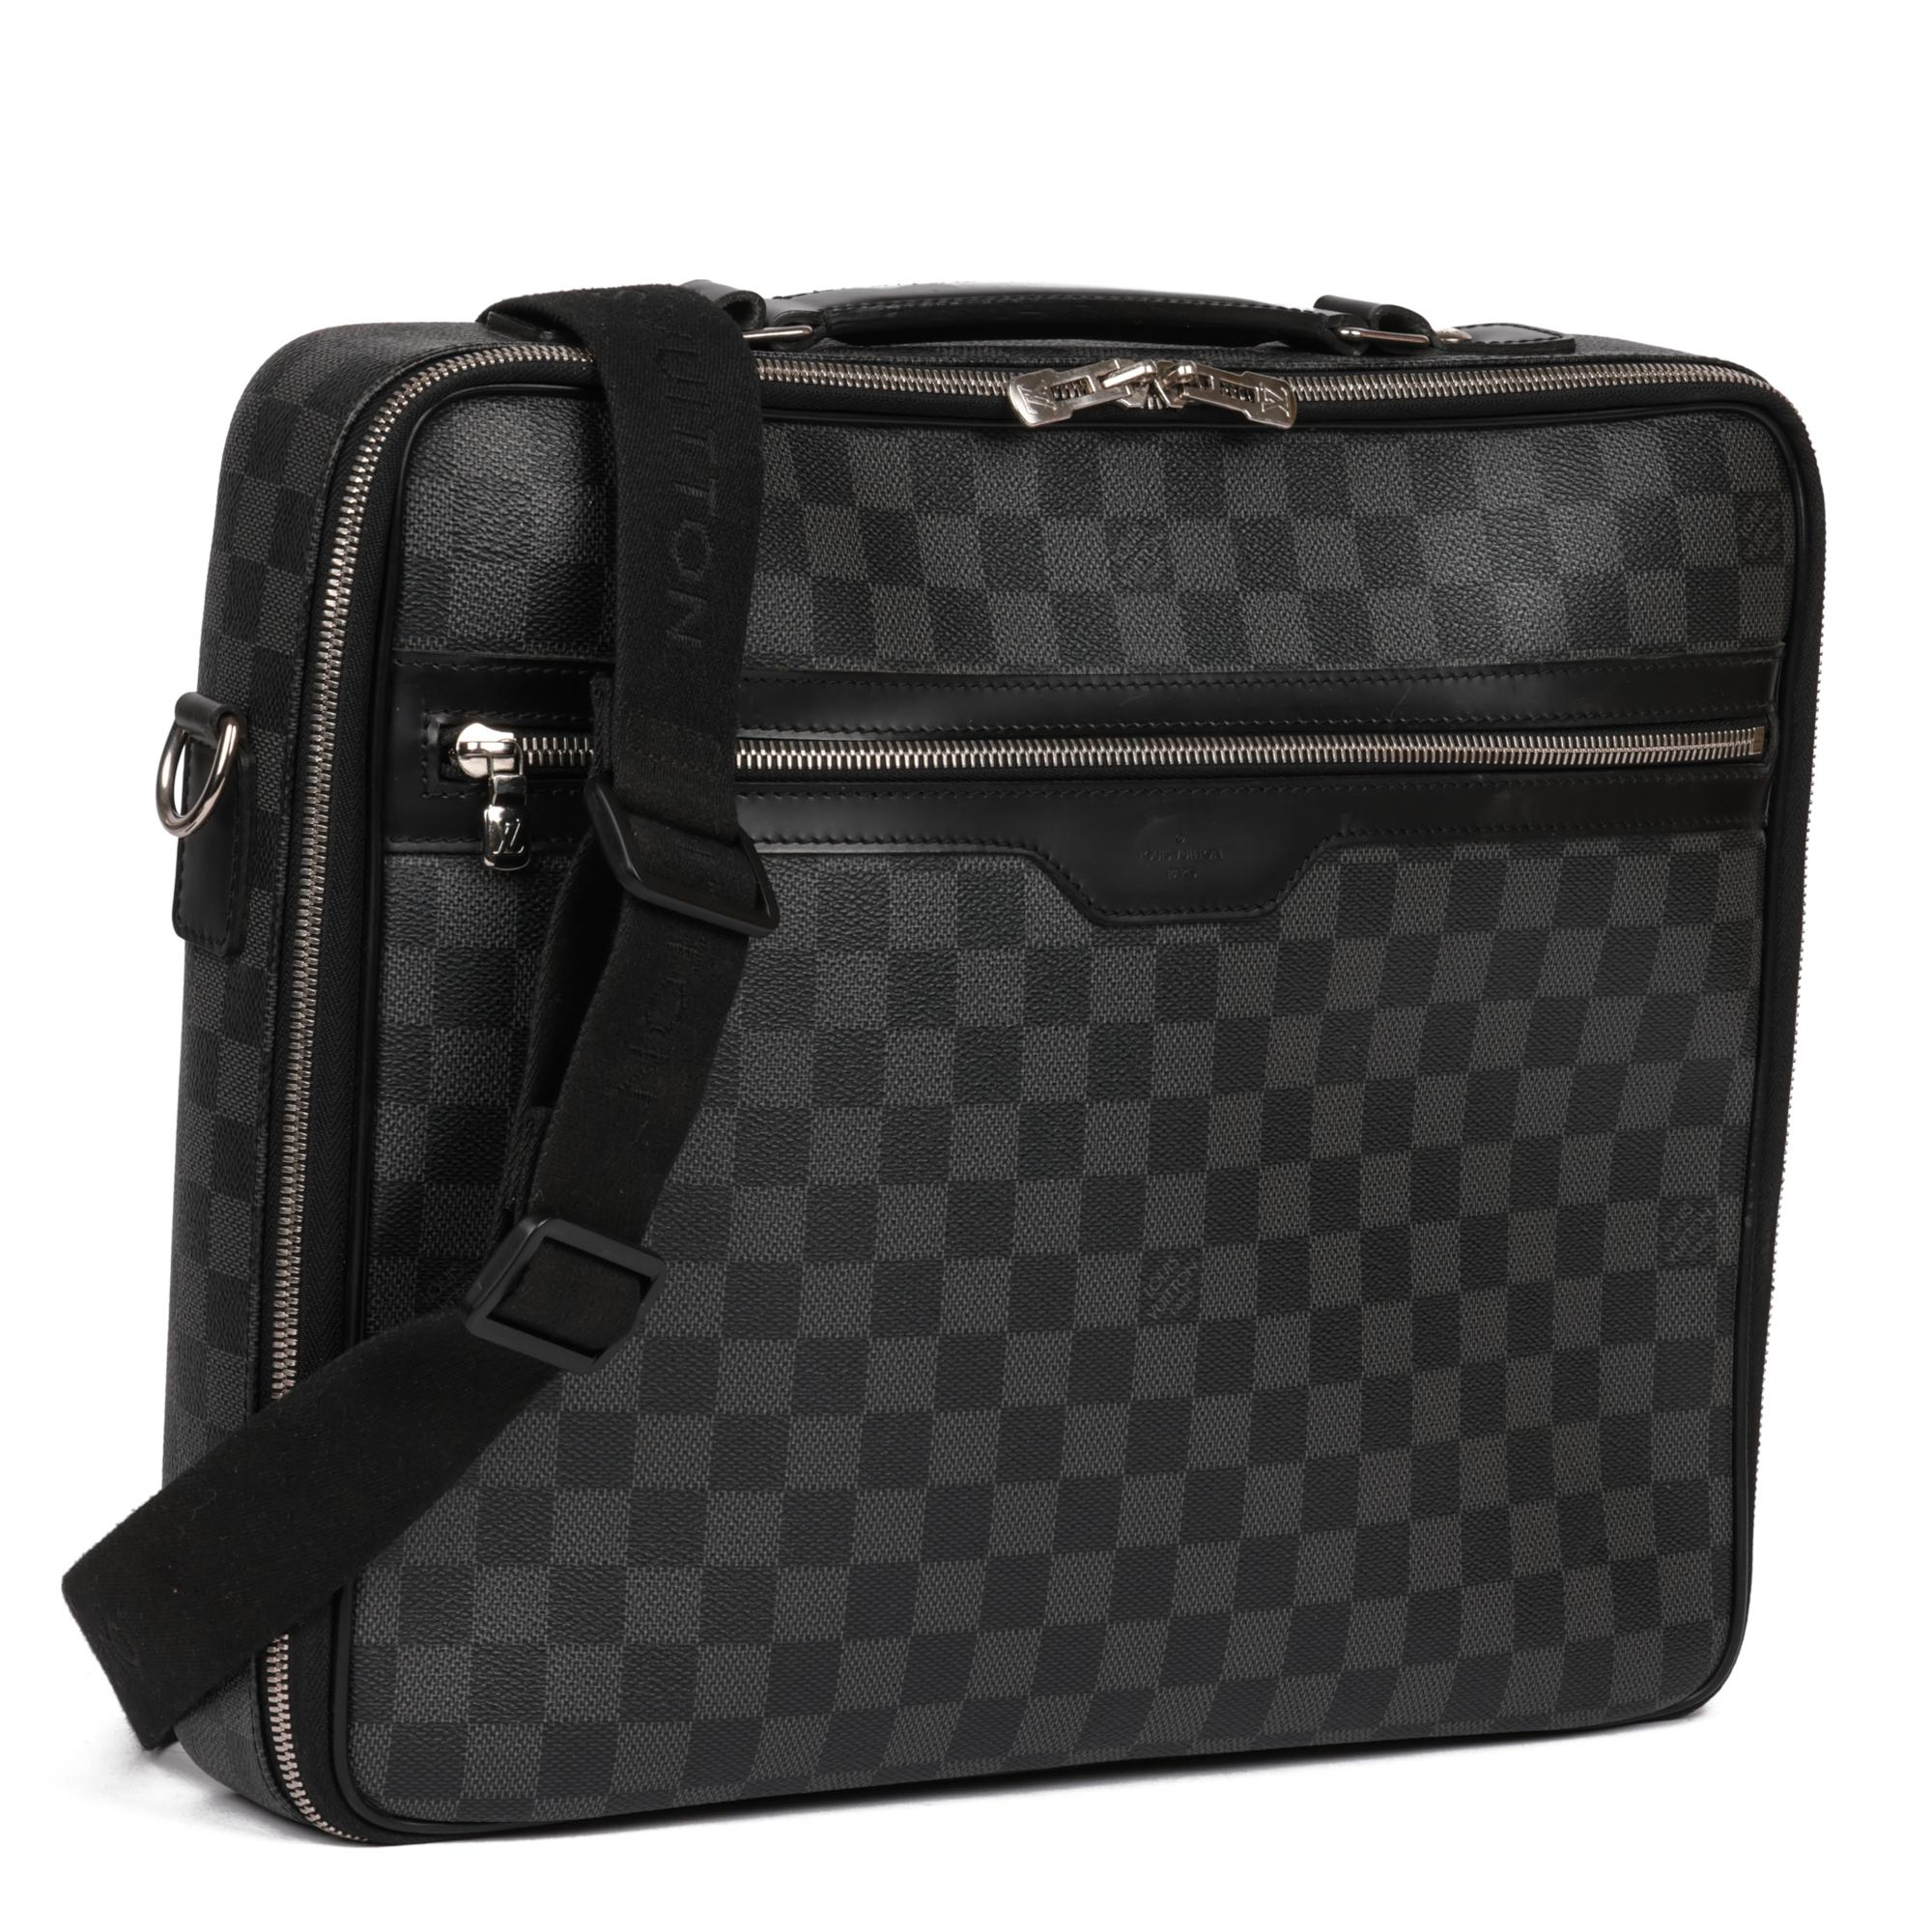 LOUIS VUITTON
Damier Graphite Coated Canvas & Black Calfskin Leather Steve Briefcase 

Xupes Reference: HB5039
Serial Number: MB2152
Age (Circa): 2012
Accompanied By: Louis Vuitton Dust Bag, Strap 
Authenticity Details: Date Stamp (Made in